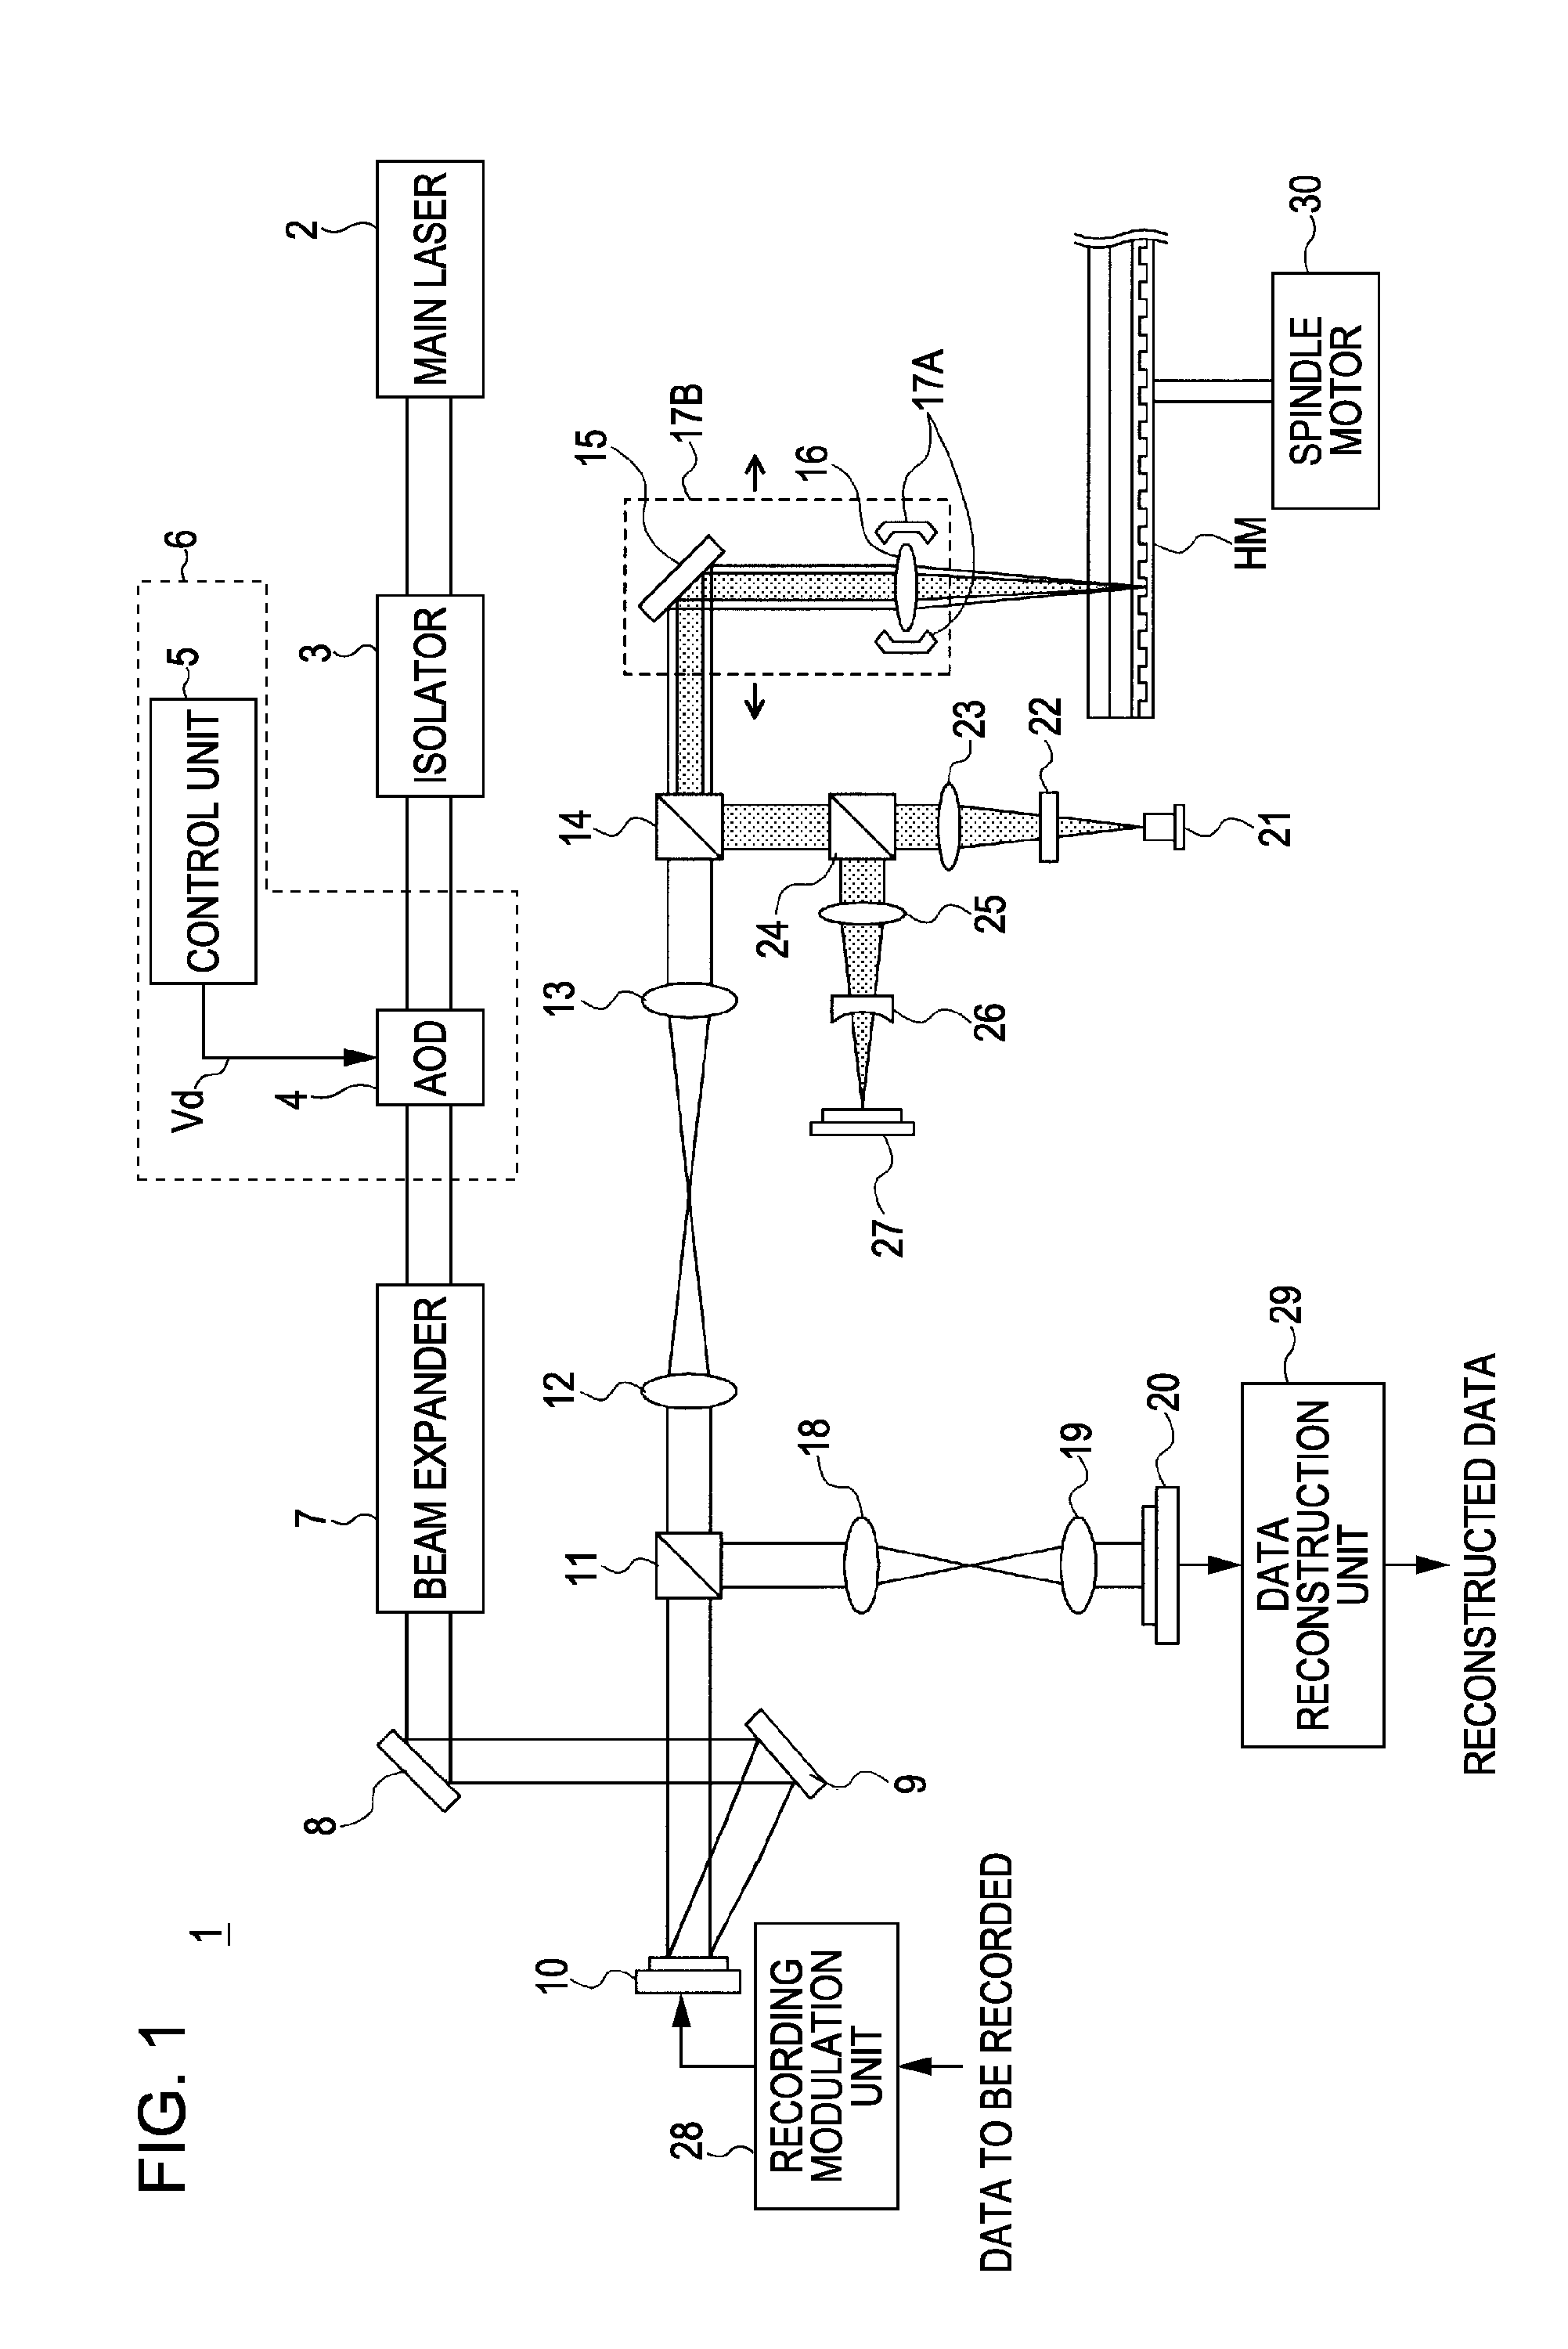 Optical unit, method for controlling drive, and holographic apparatus